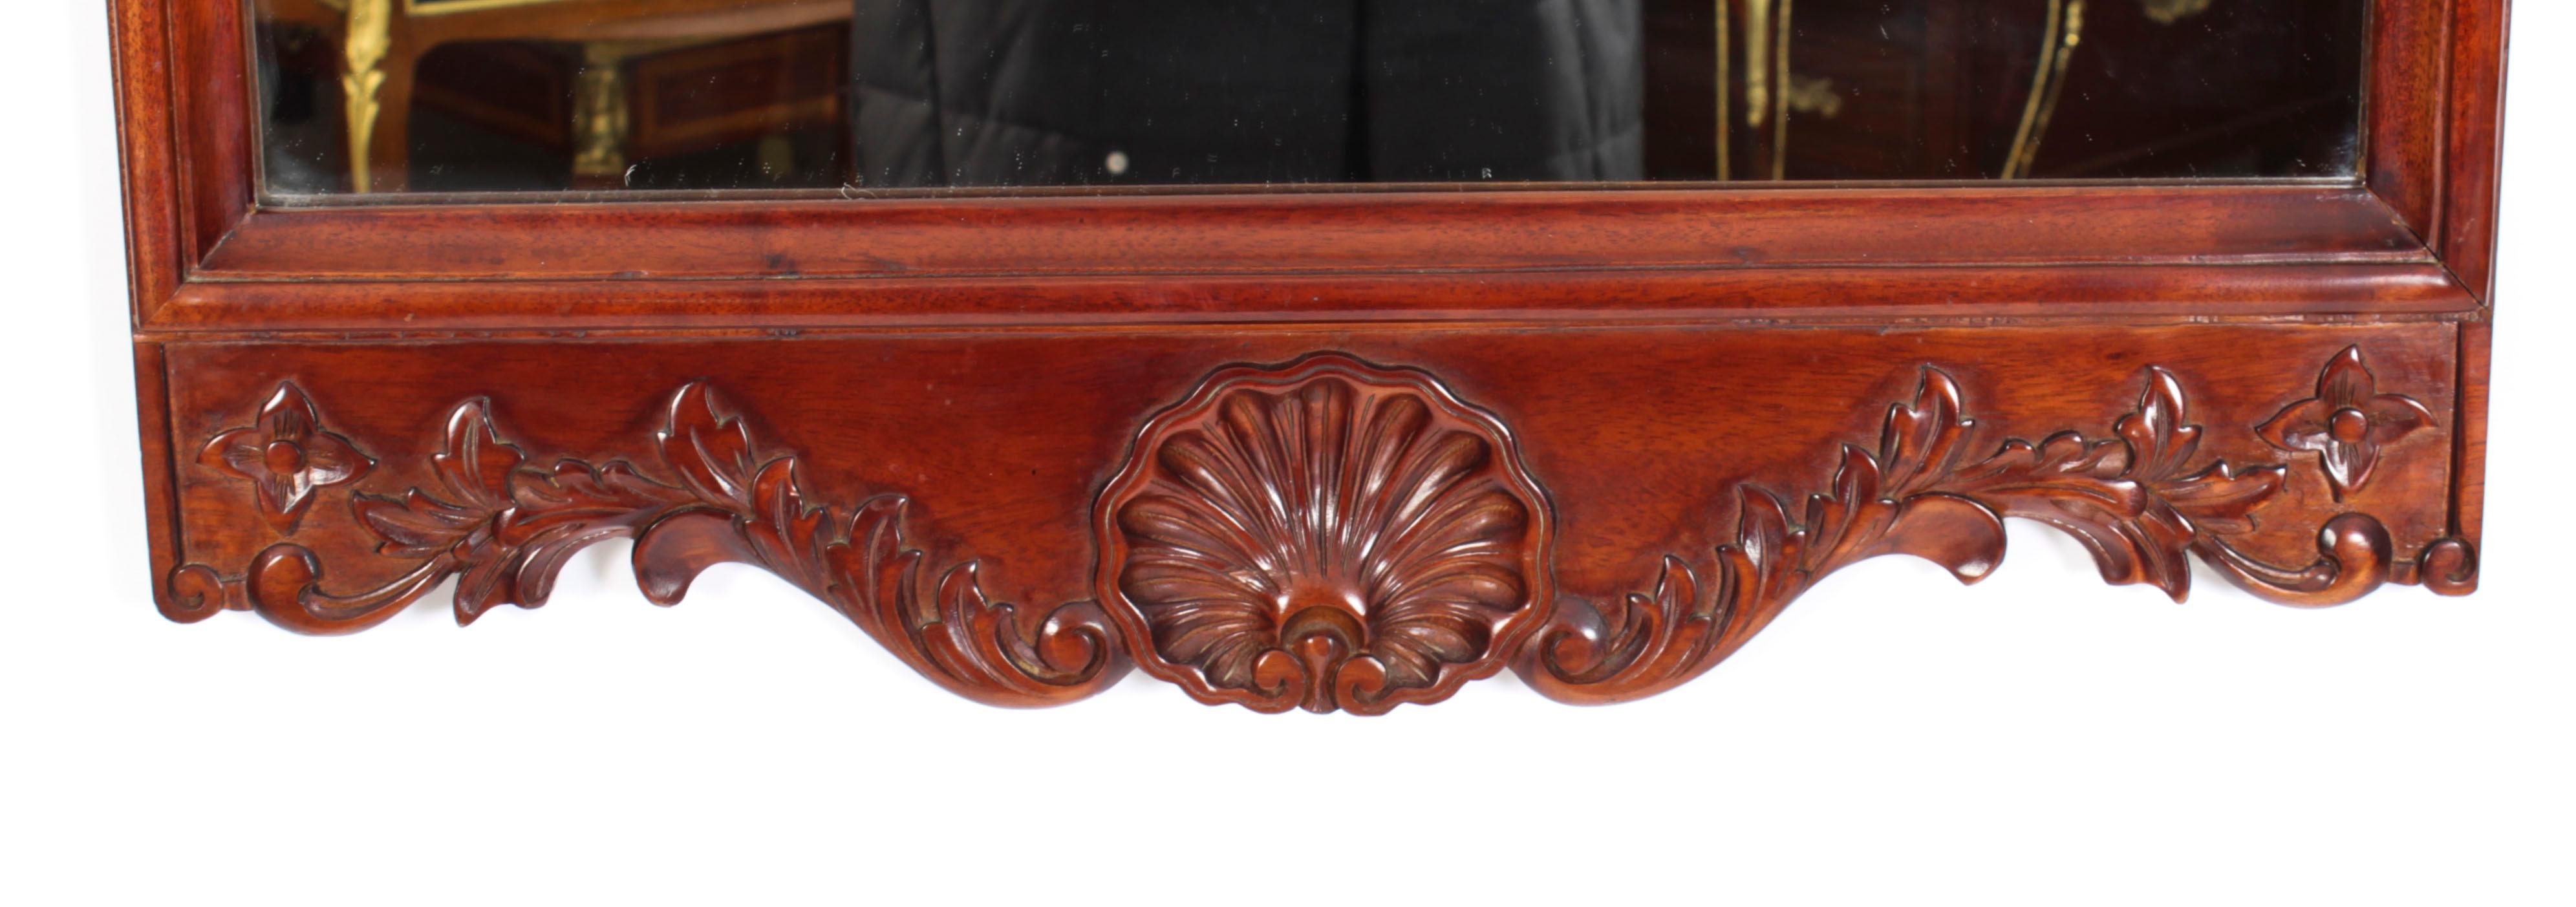 Vintage Carved Mahogany Mirror Mid 20th C For Sale 2